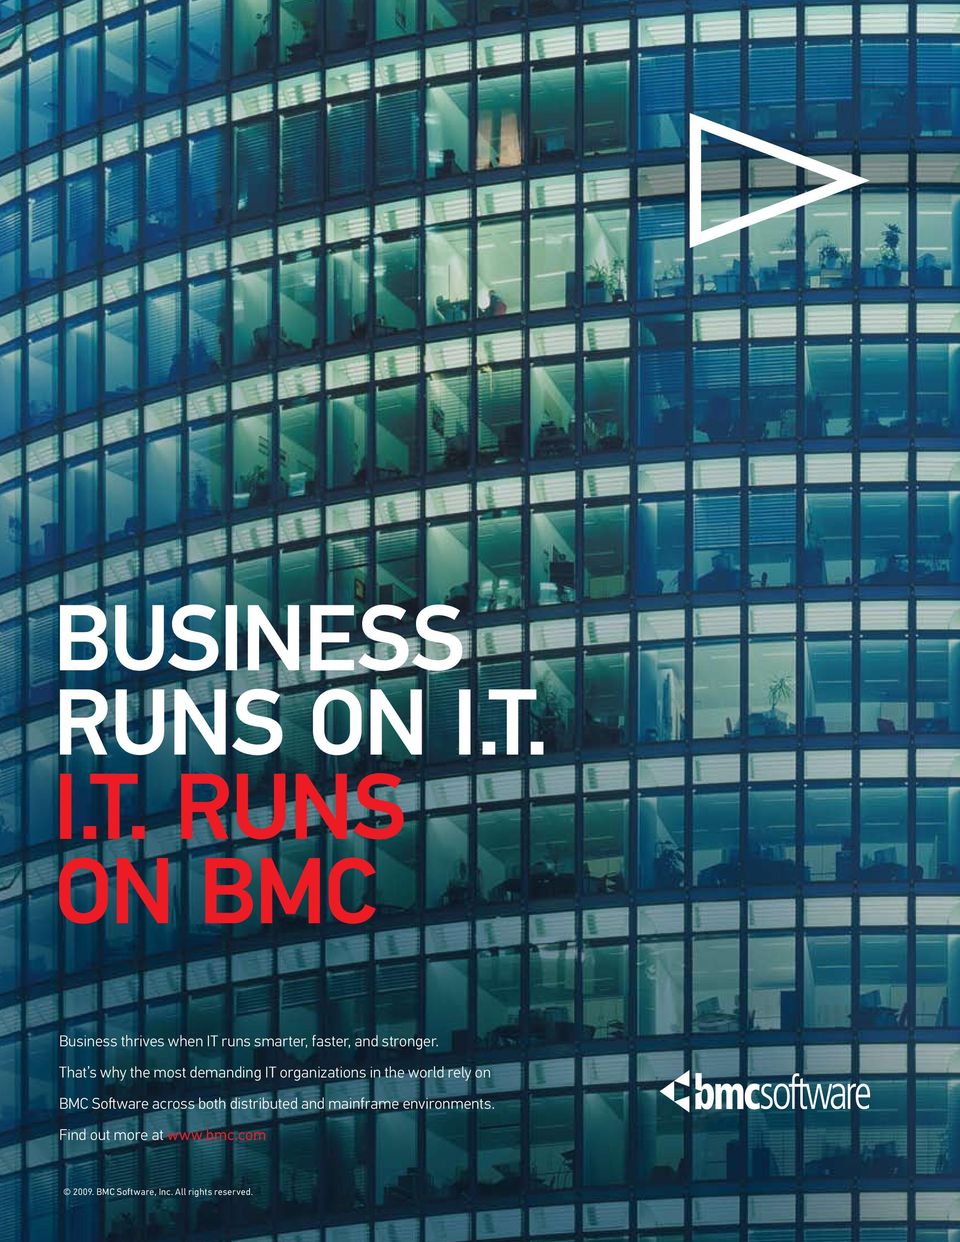 That s why the most demanding IT organizations in the world rely on BMC